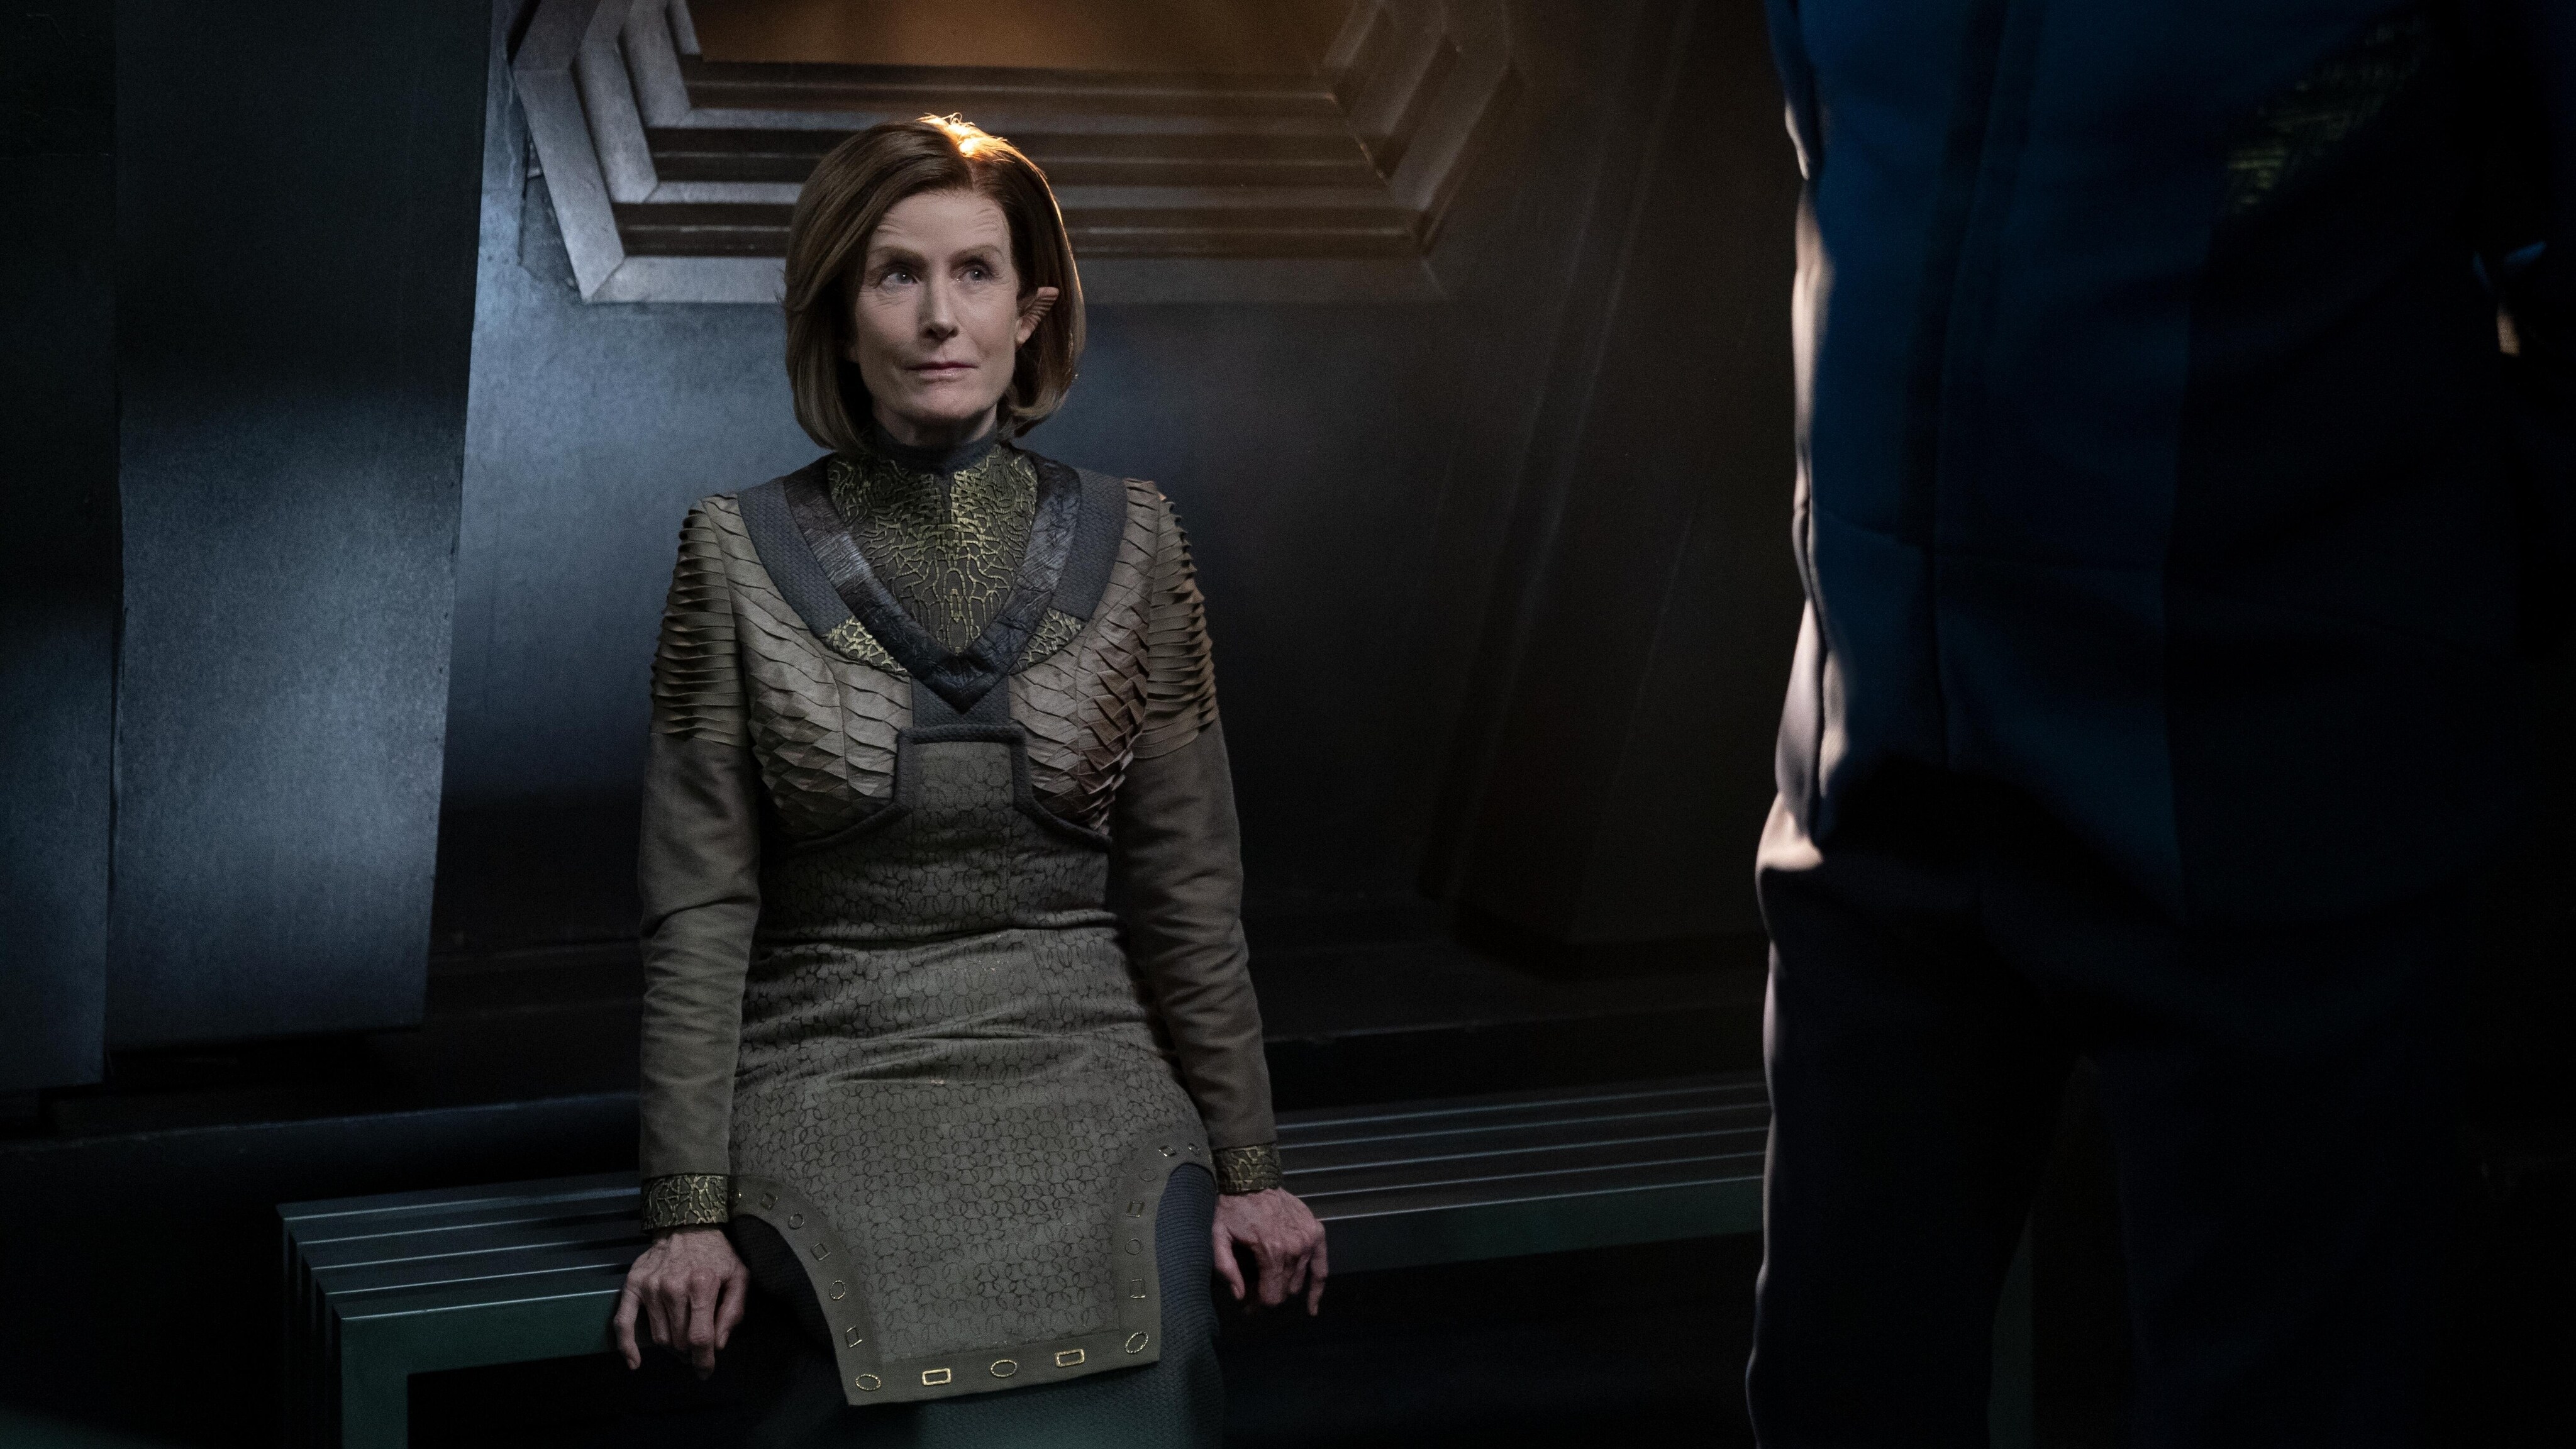 The Orville: New Horizons -- “Gently Falling Rain” - Episode 304 -- The Orville crew leads a Union delegation to sign a peace treaty with the Krill. Speria Balask (Lisa Banes), shown. (Photo by: Michael Desmond/Hulu)